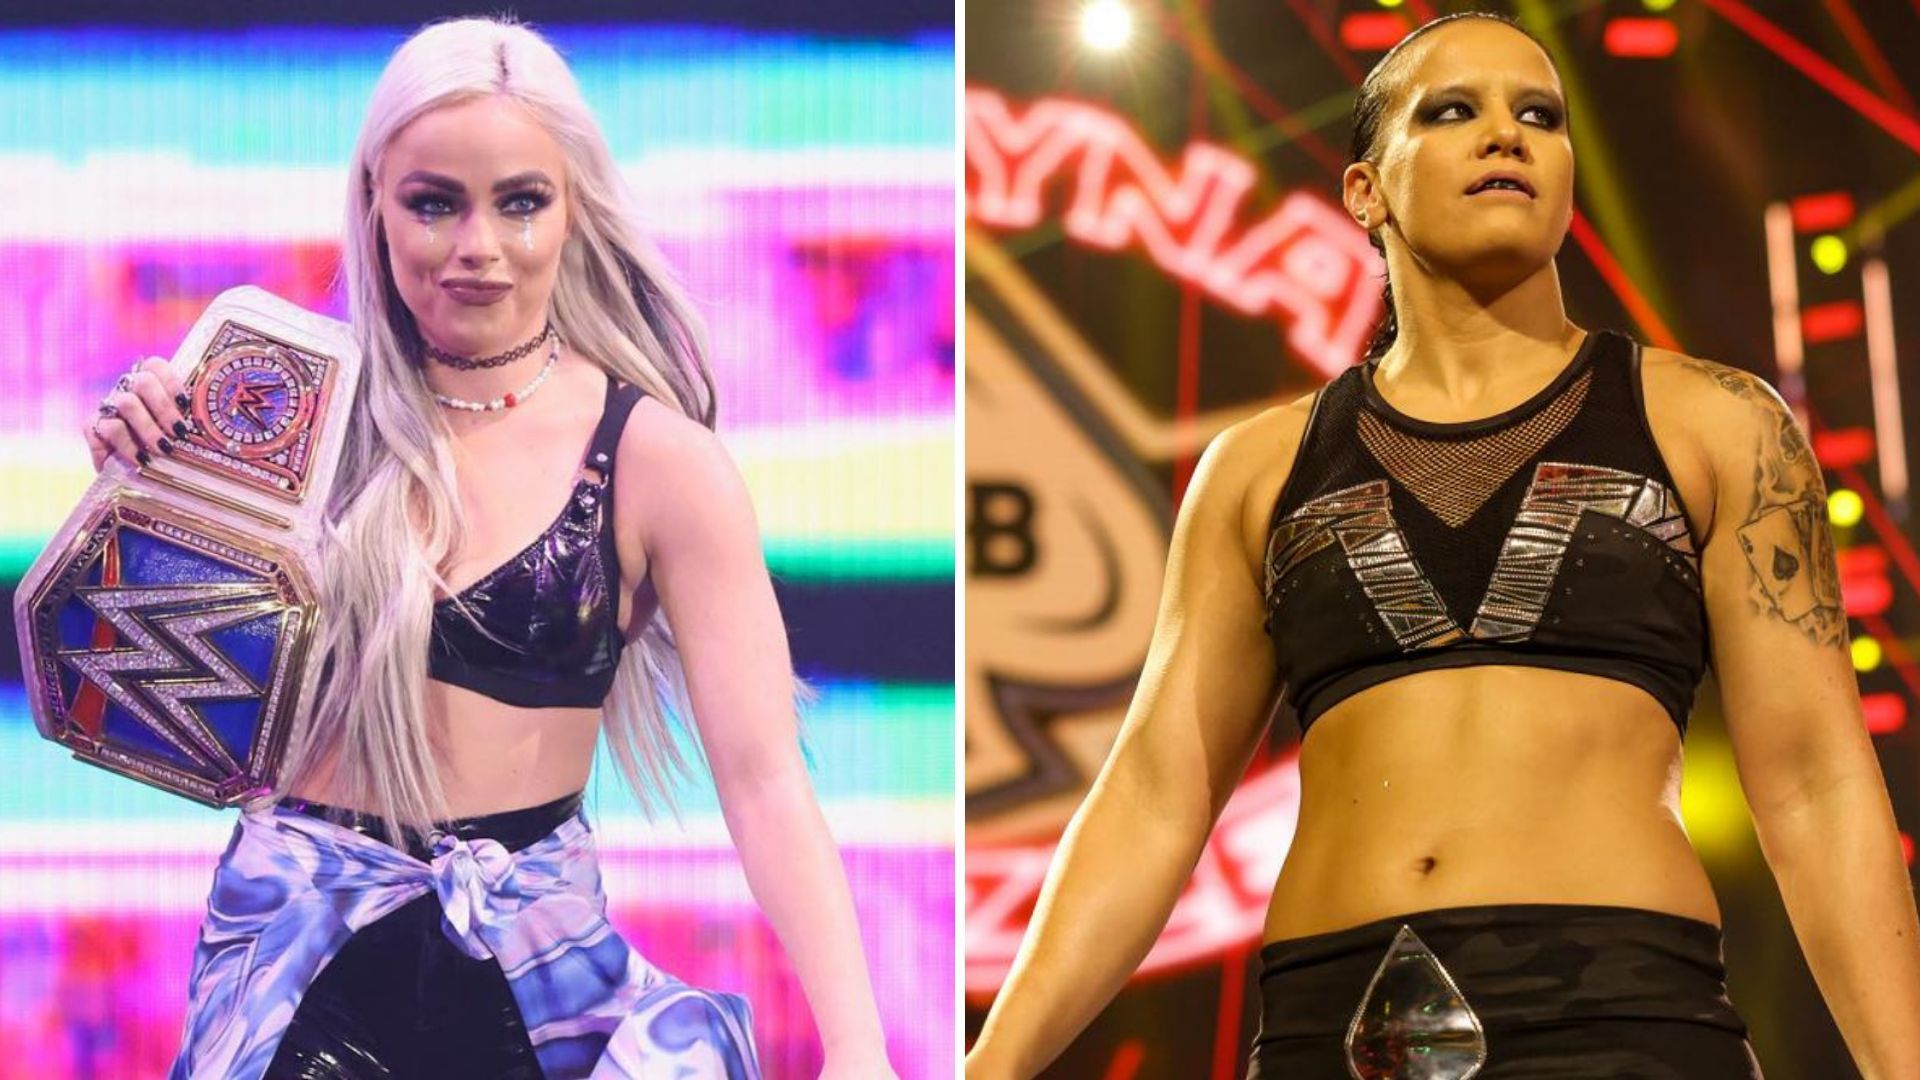 Liv Morgan will take on Shayna Baszler at Clash at the Castle